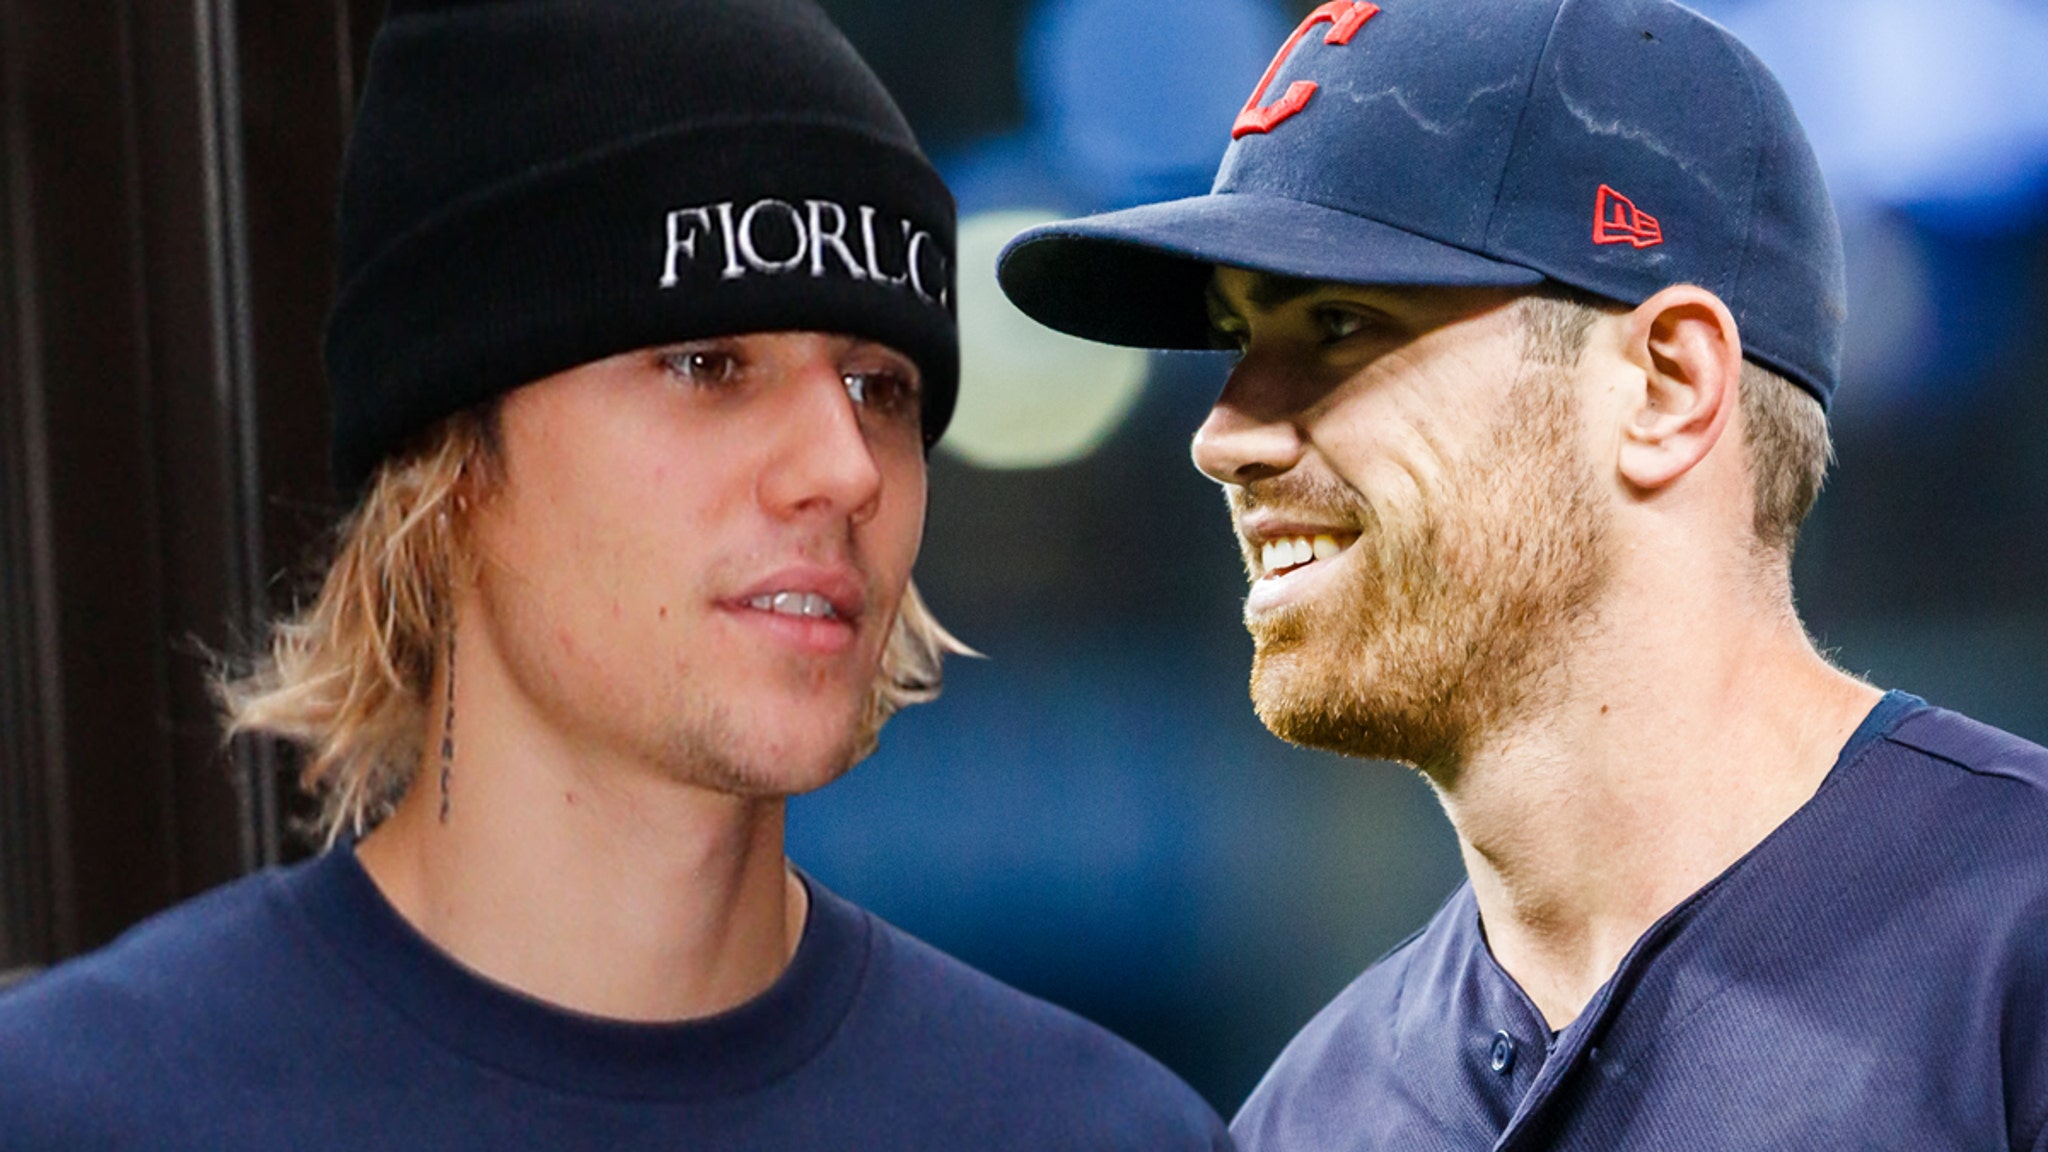 Cleveland Indians Courting Justin Bieber to Angels Game to Meet